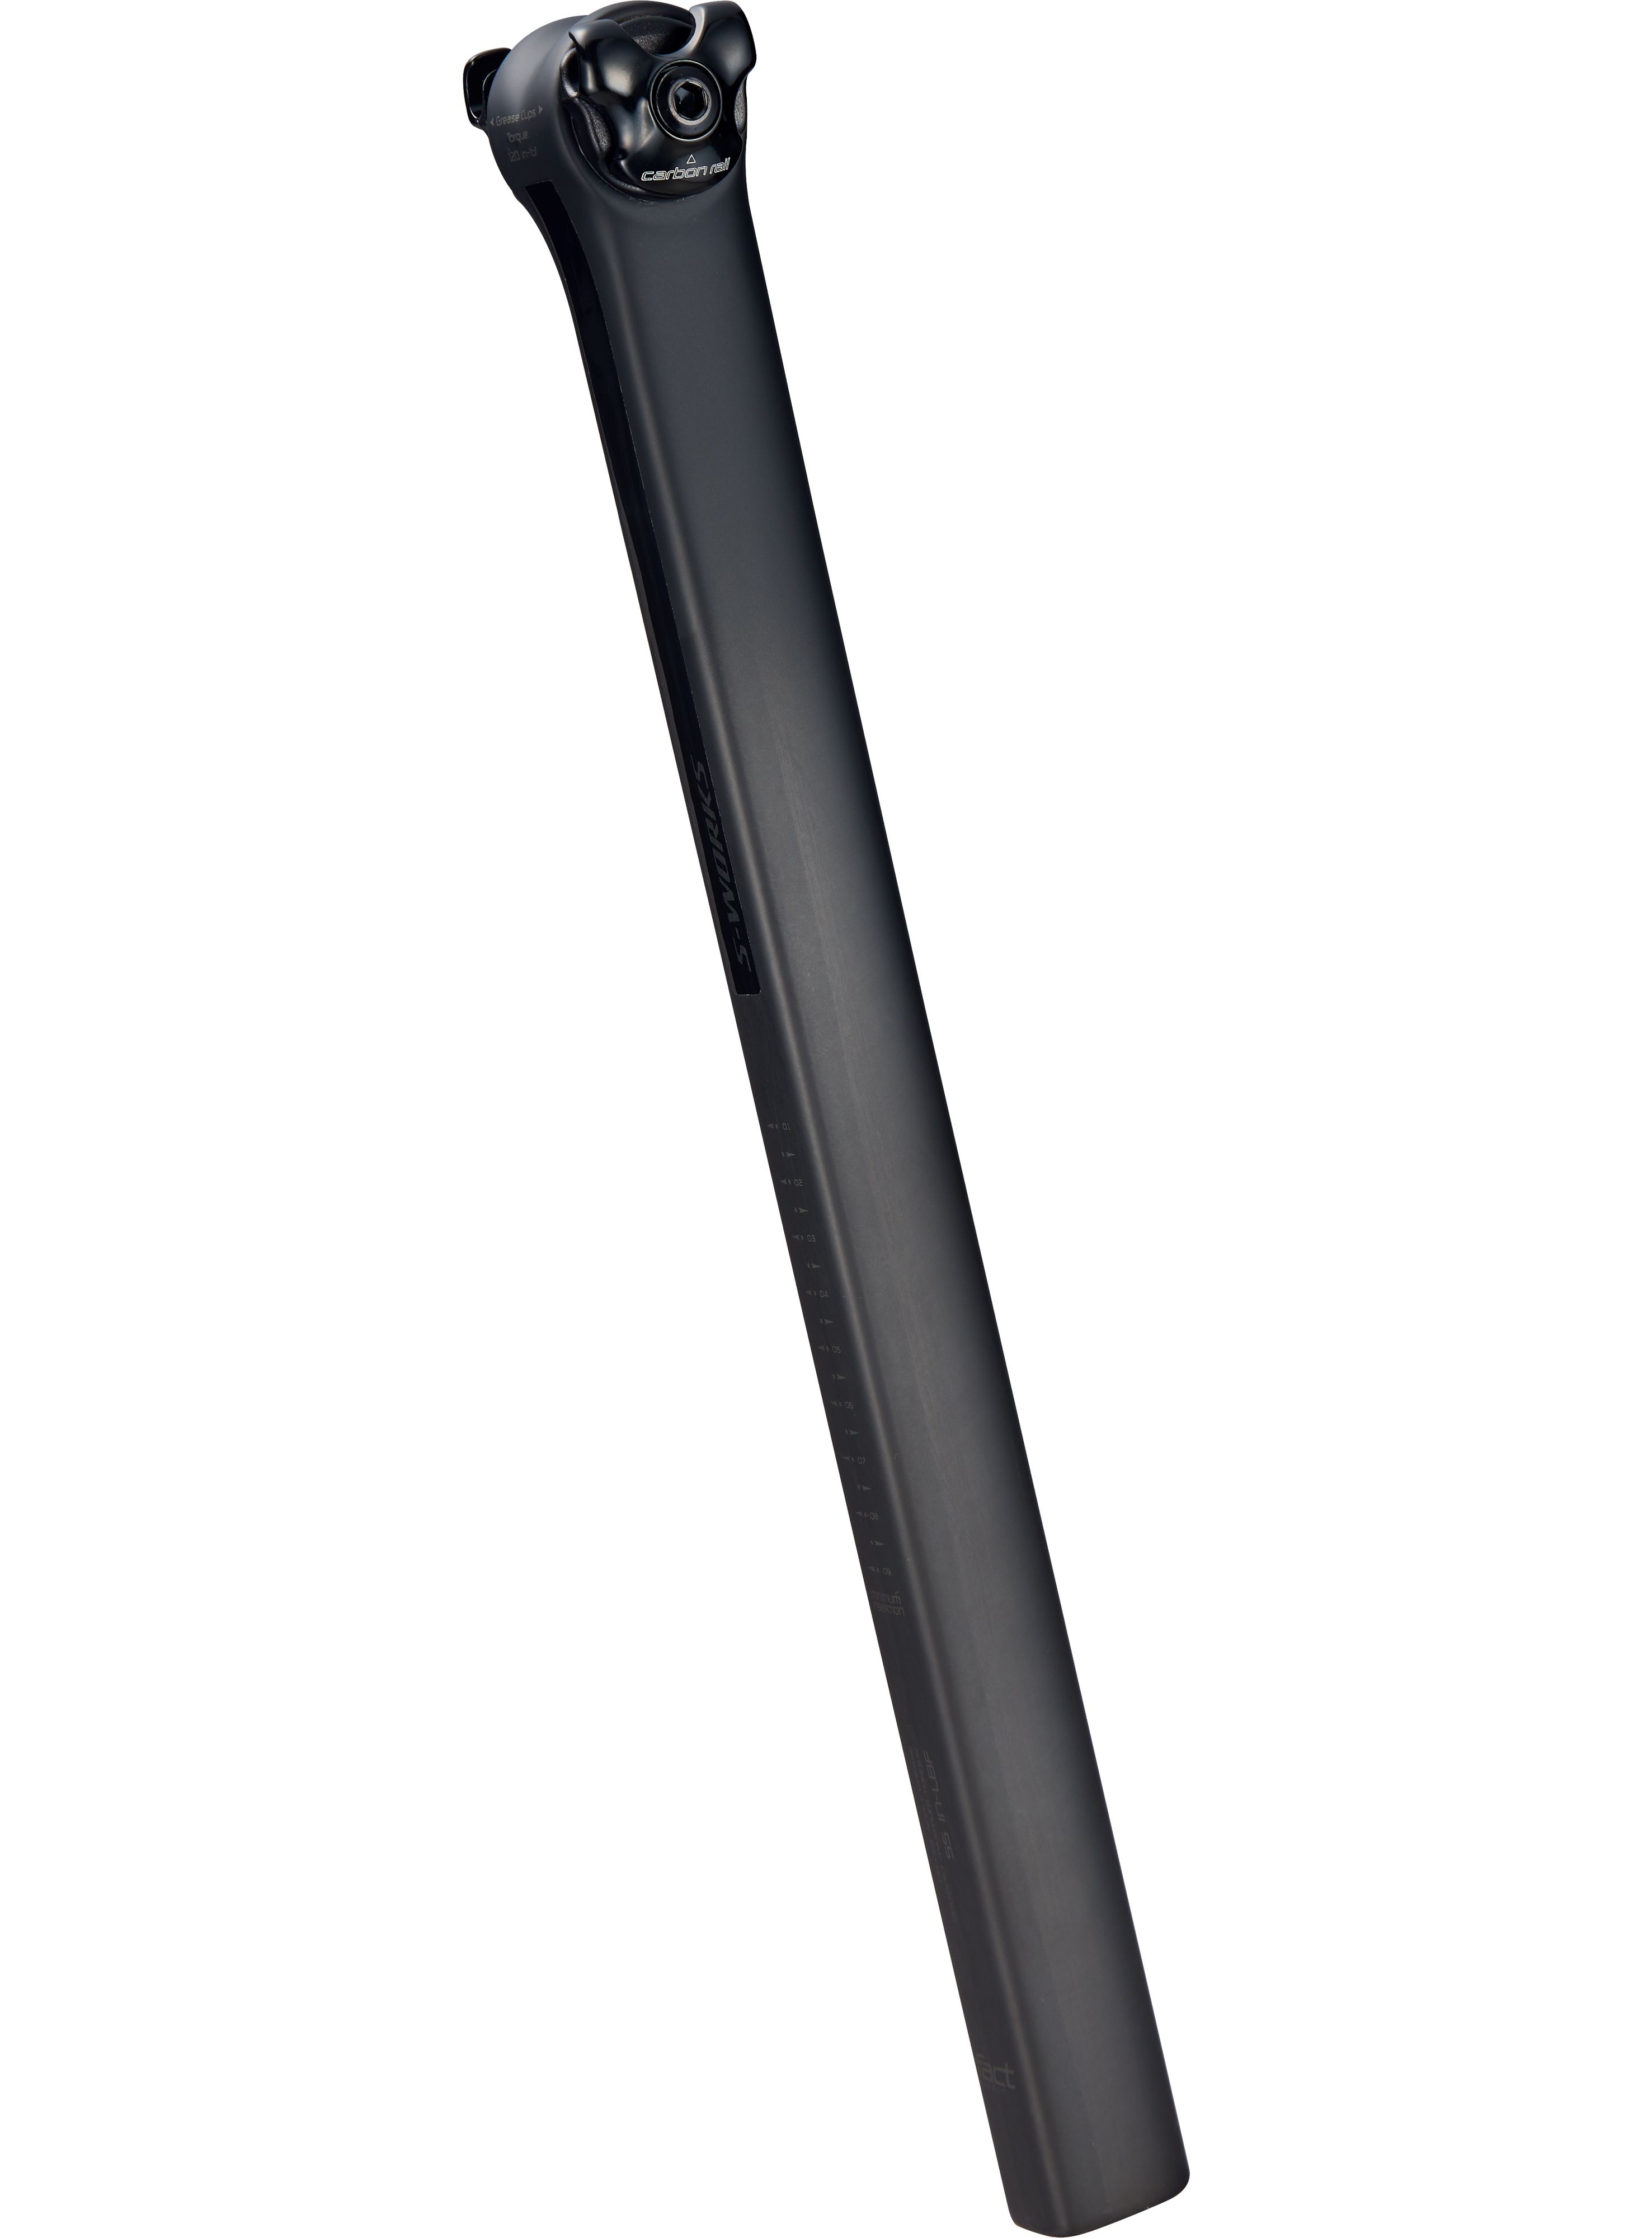 specialized pave seatpost